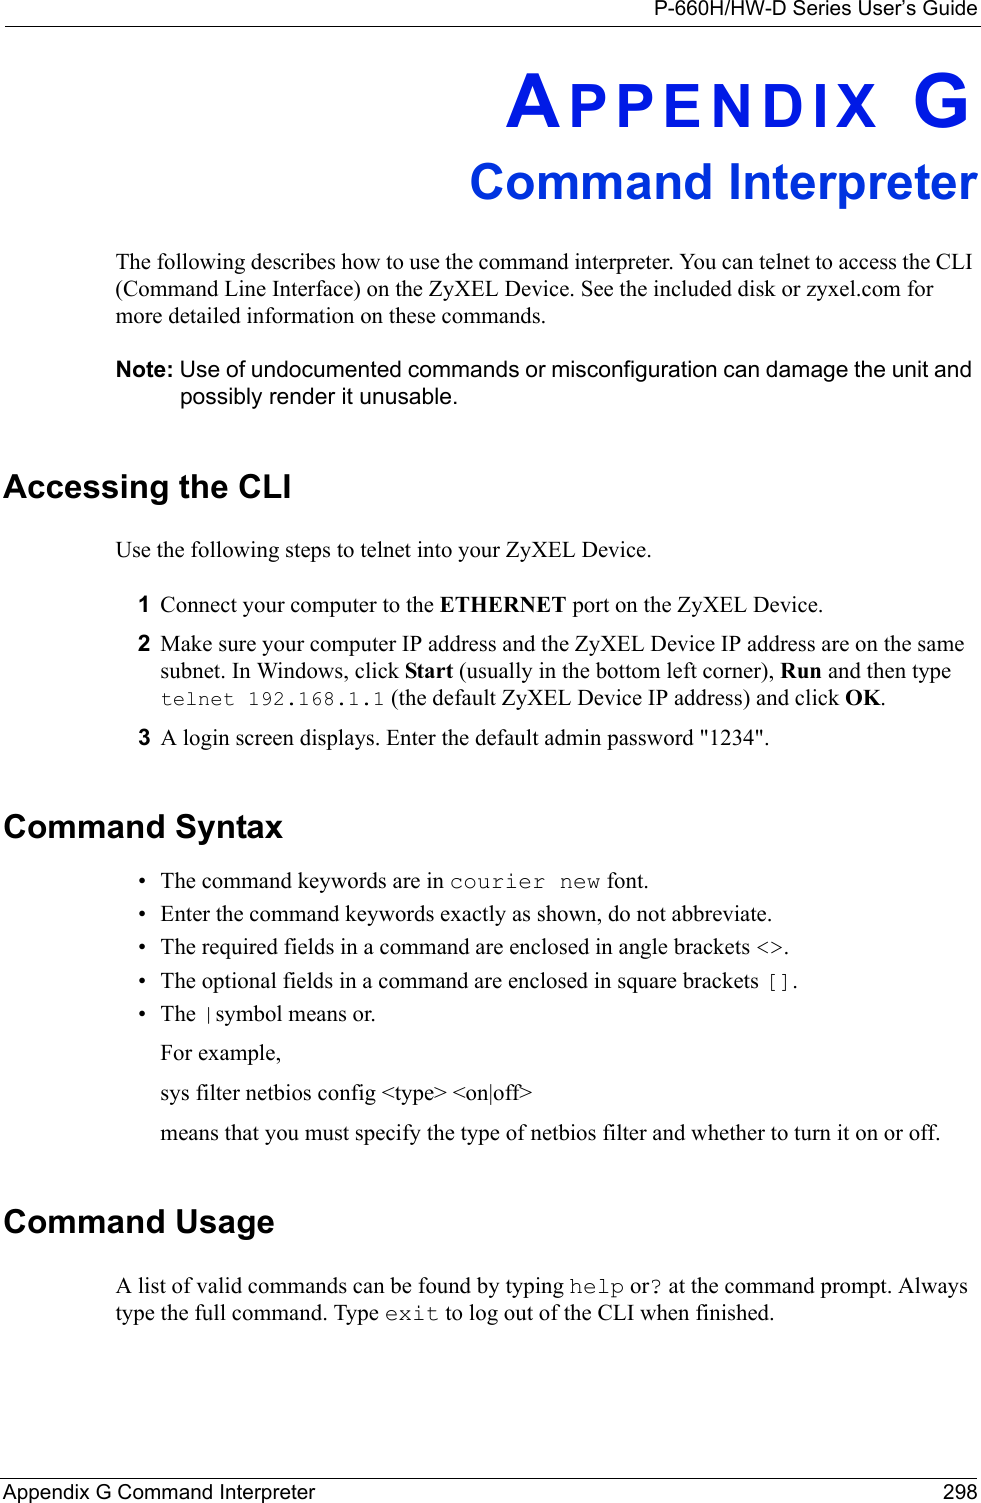 P-660H/HW-D Series User’s GuideAppendix G Command Interpreter 298APPENDIX GCommand InterpreterThe following describes how to use the command interpreter. You can telnet to access the CLI (Command Line Interface) on the ZyXEL Device. See the included disk or zyxel.com for more detailed information on these commands.Note: Use of undocumented commands or misconfiguration can damage the unit and possibly render it unusable.Accessing the CLIUse the following steps to telnet into your ZyXEL Device.1Connect your computer to the ETHERNET port on the ZyXEL Device.2Make sure your computer IP address and the ZyXEL Device IP address are on the same subnet. In Windows, click Start (usually in the bottom left corner), Run and then type  telnet 192.168.1.1 (the default ZyXEL Device IP address) and click OK.3A login screen displays. Enter the default admin password &quot;1234&quot;.Command Syntax• The command keywords are in courier new font.• Enter the command keywords exactly as shown, do not abbreviate.• The required fields in a command are enclosed in angle brackets &lt;&gt;. • The optional fields in a command are enclosed in square brackets [].•The |symbol means or.For example,sys filter netbios config &lt;type&gt; &lt;on|off&gt;means that you must specify the type of netbios filter and whether to turn it on or off.Command UsageA list of valid commands can be found by typing help or? at the command prompt. Always type the full command. Type exit to log out of the CLI when finished.